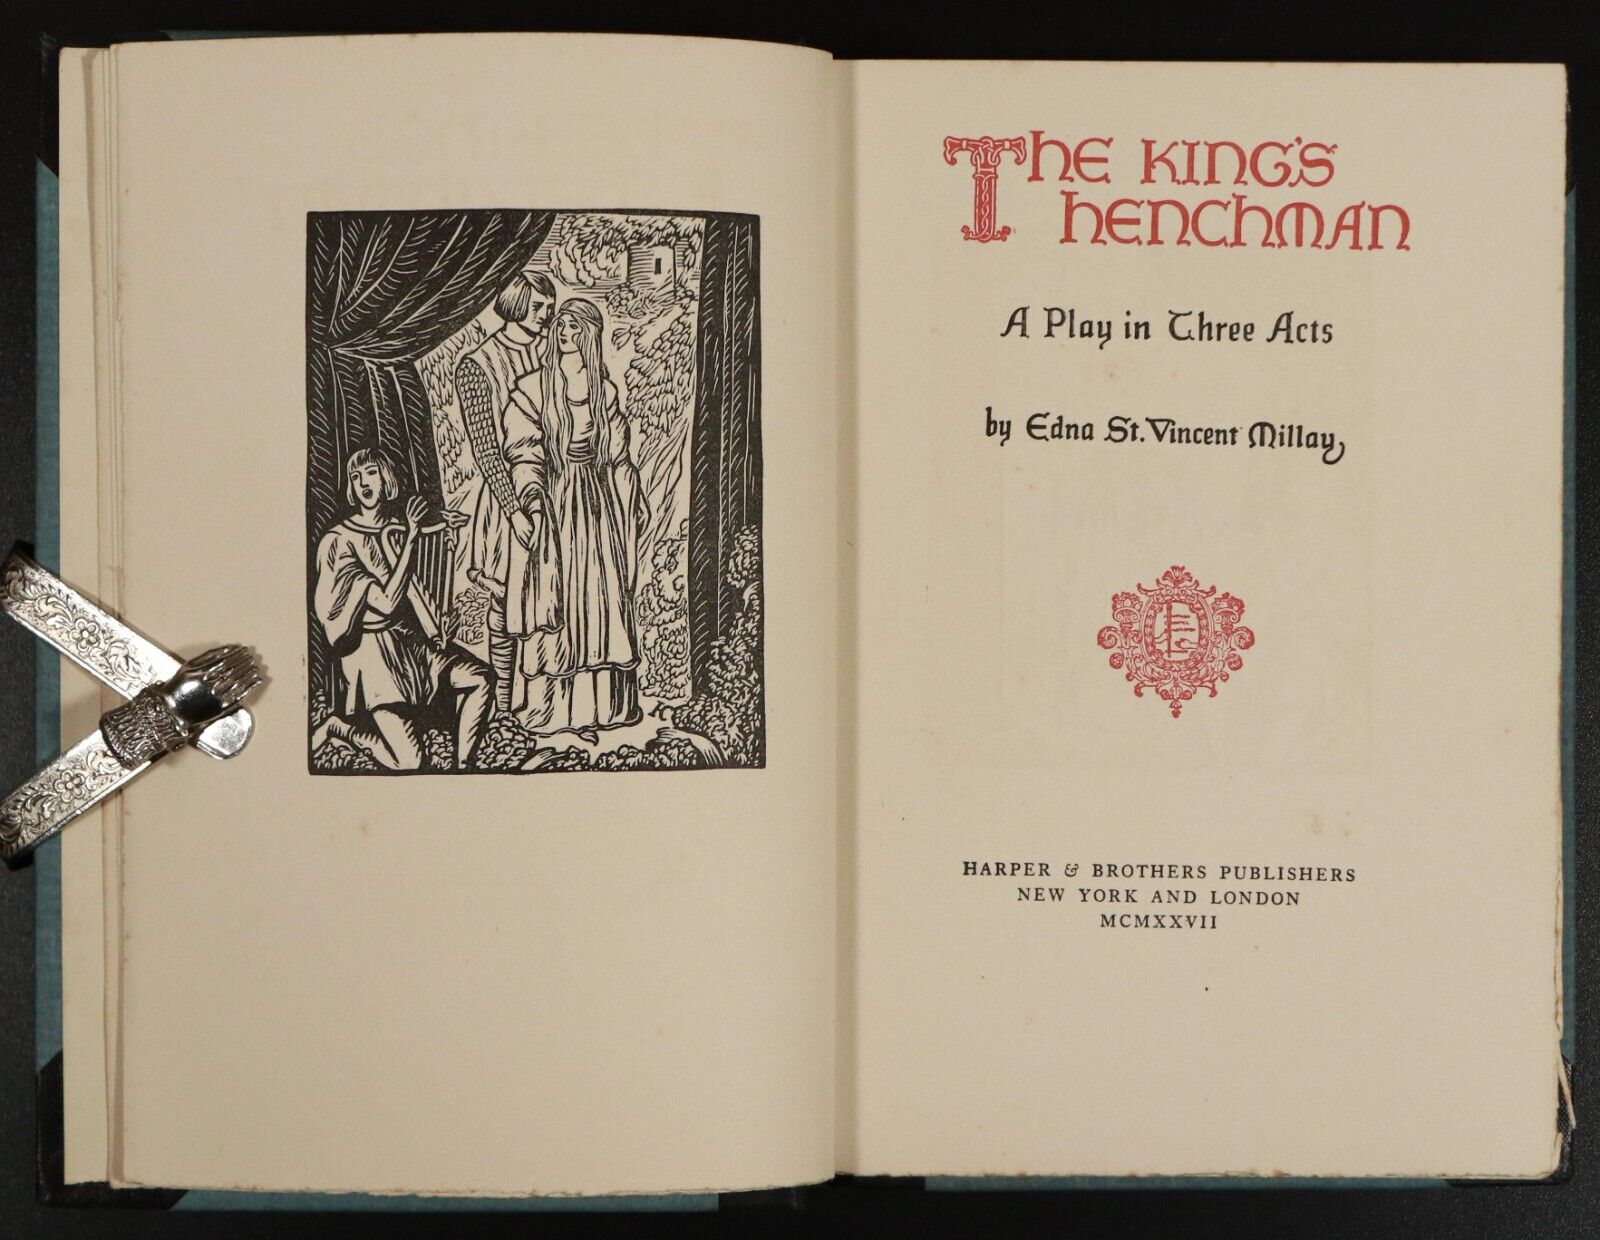 1927 The King's Henchman by Edna St Vincent Millary Antique Theatre History Book - 0